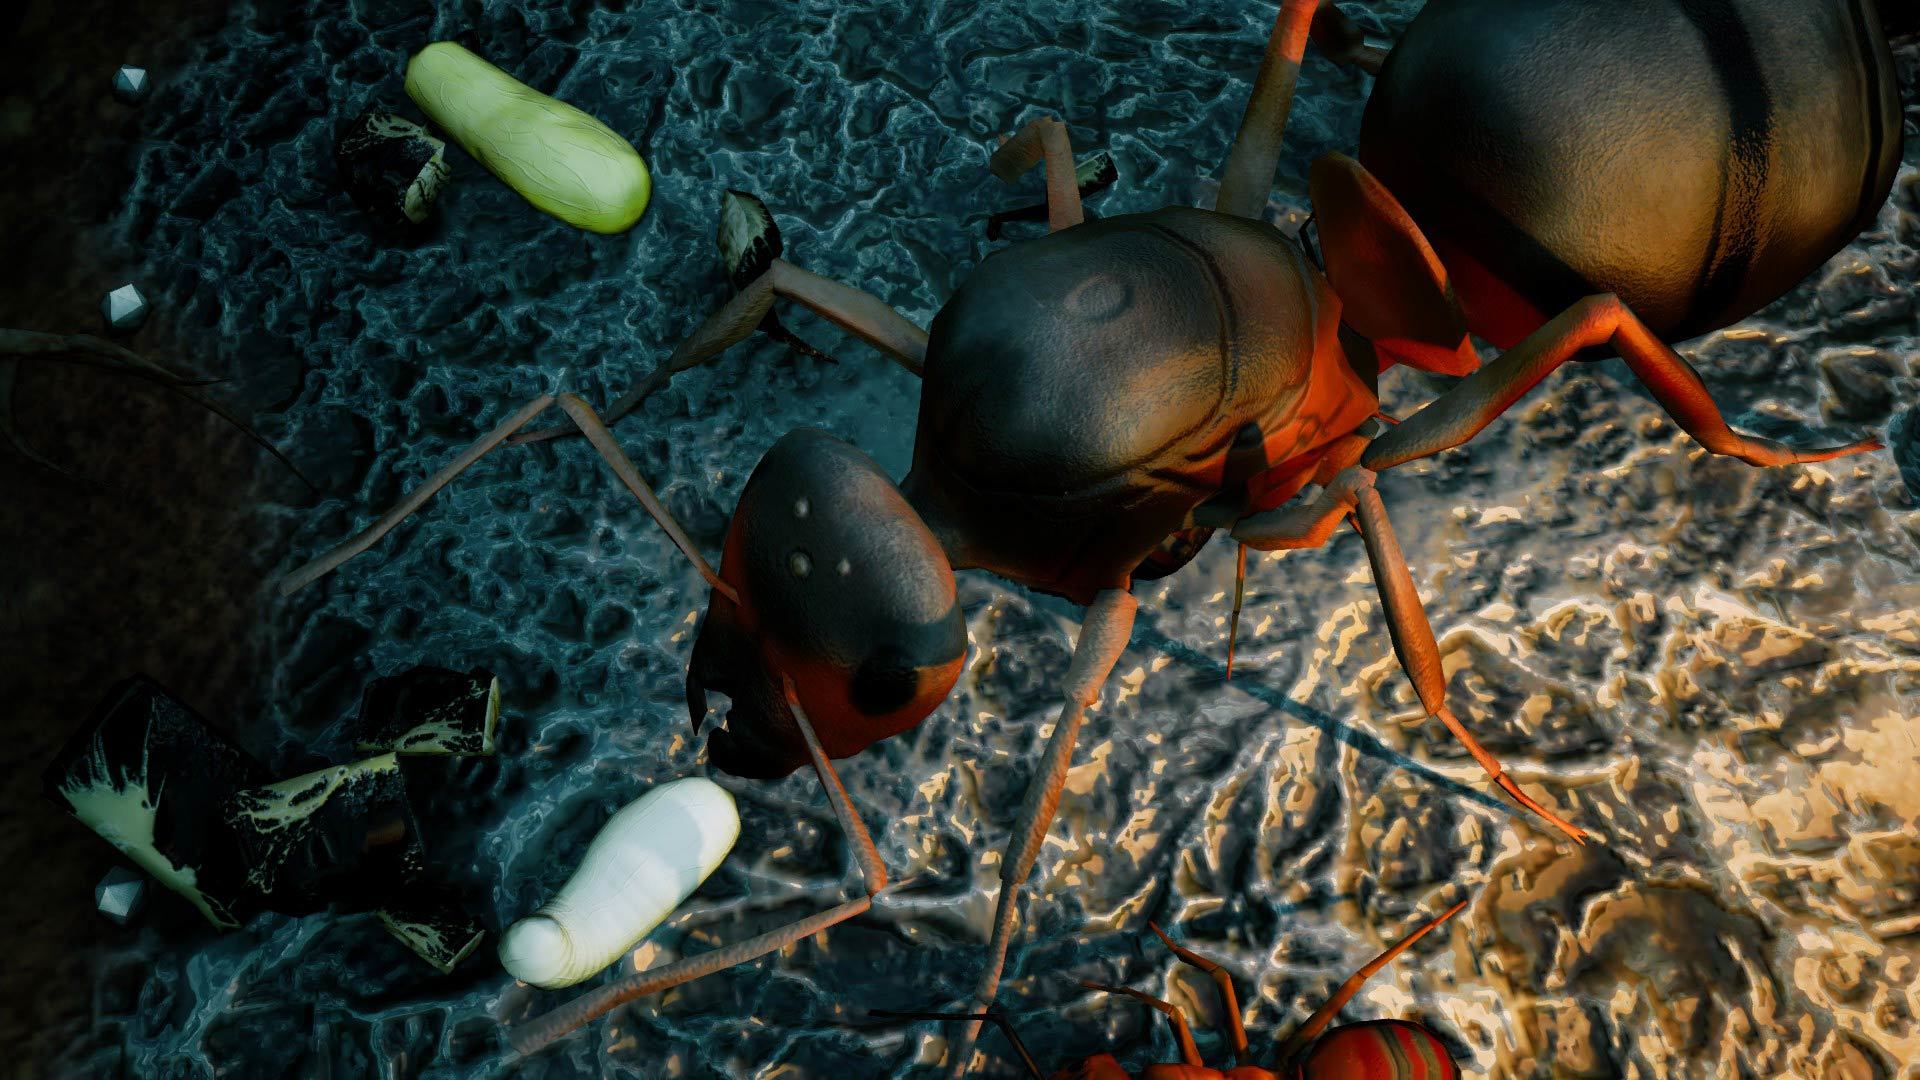 get your ants to follow pheromones in empire of the undergrowth